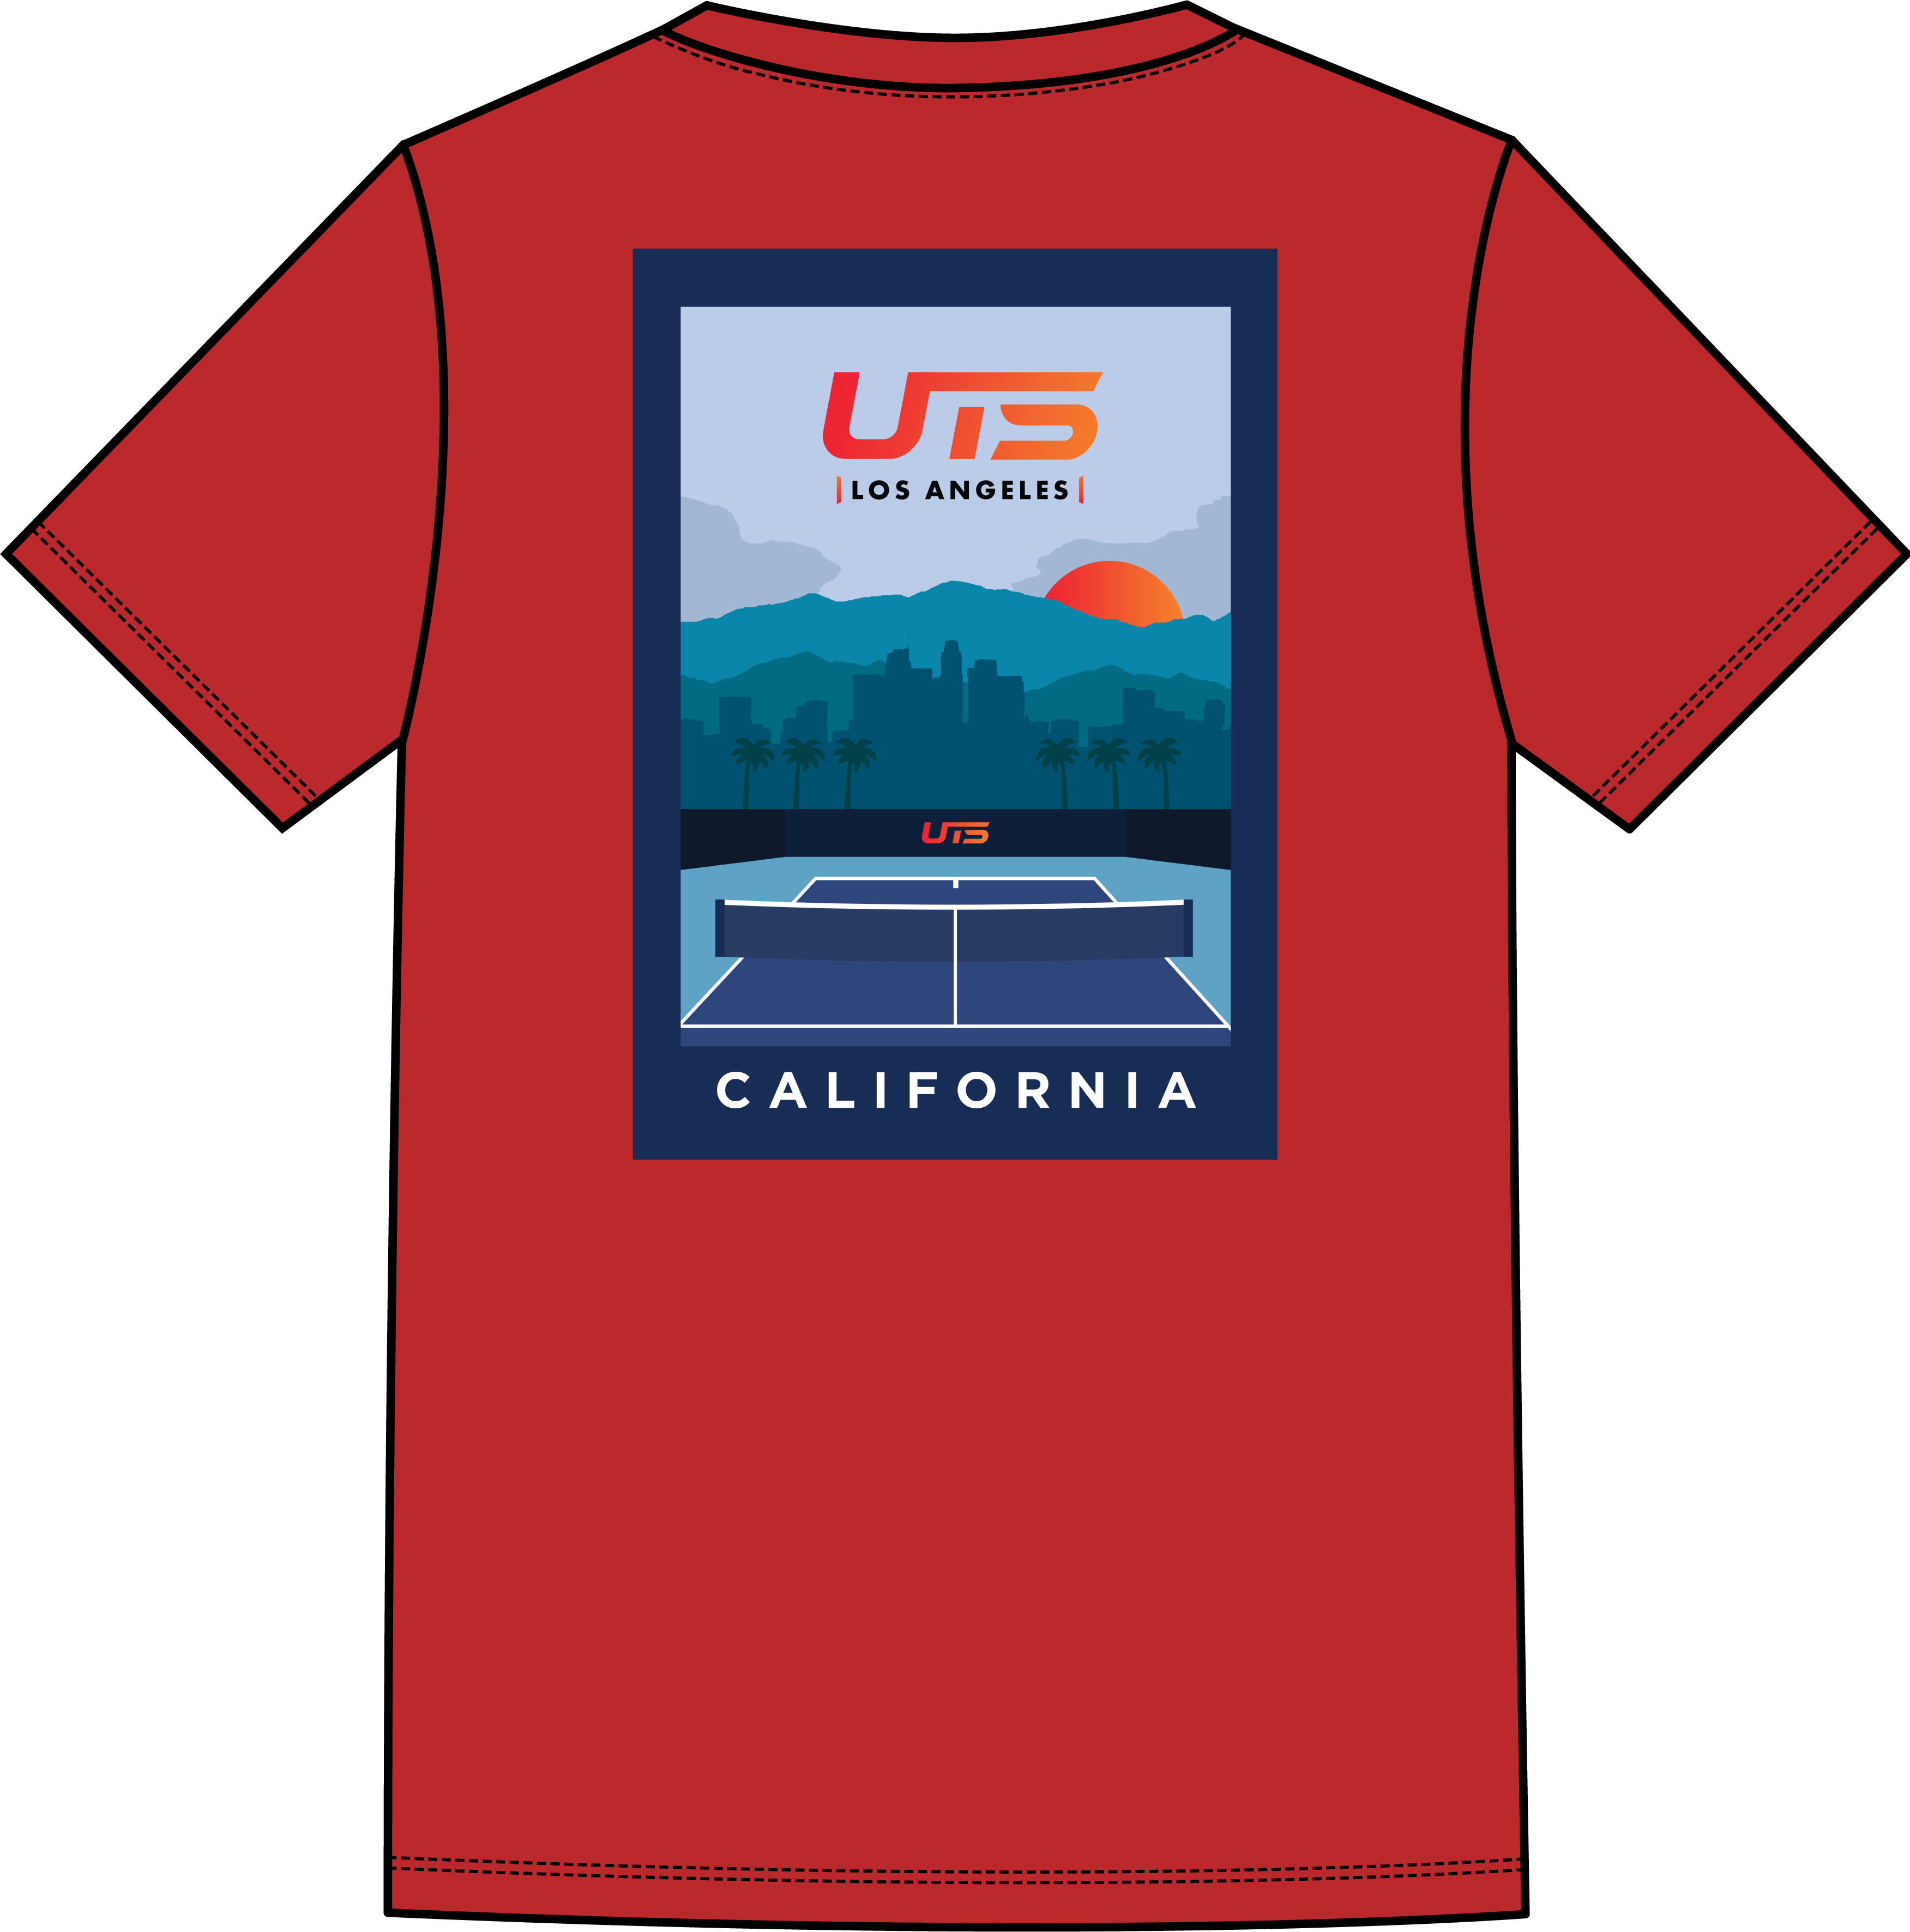 UTS Los Angeles T-Shirt - Red